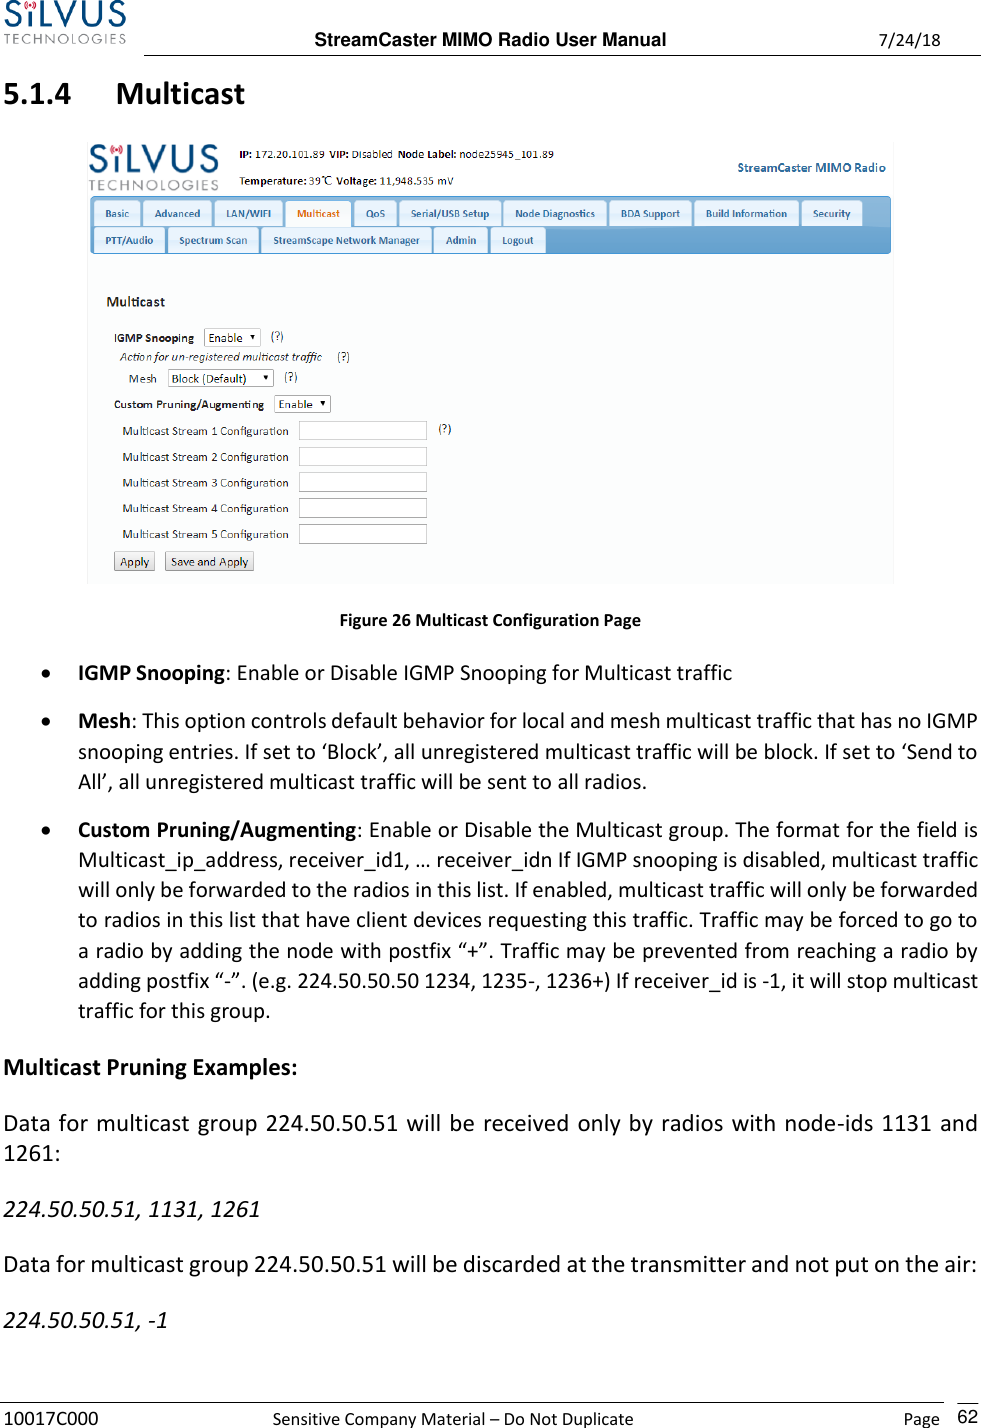  StreamCaster MIMO Radio User Manual  7/24/18 10017C000  Sensitive Company Material – Do Not Duplicate    Page    62 5.1.4 Multicast  Figure 26 Multicast Configuration Page • IGMP Snooping: Enable or Disable IGMP Snooping for Multicast traffic • Mesh: This option controls default behavior for local and mesh multicast traffic that has no IGMP snooping entries. If set to ‘Block’, all unregistered multicast traffic will be block. If set to ‘Send to All’, all unregistered multicast traffic will be sent to all radios. • Custom Pruning/Augmenting: Enable or Disable the Multicast group. The format for the field is Multicast_ip_address, receiver_id1, … receiver_idn If IGMP snooping is disabled, multicast traffic will only be forwarded to the radios in this list. If enabled, multicast traffic will only be forwarded to radios in this list that have client devices requesting this traffic. Traffic may be forced to go to a radio by adding the node with postfix “+”. Traffic may be prevented from reaching a radio by adding postfix “-”. (e.g. 224.50.50.50 1234, 1235-, 1236+) If receiver_id is -1, it will stop multicast traffic for this group. Multicast Pruning Examples: Data for multicast group 224.50.50.51 will be received only by radios with node-ids 1131 and 1261: 224.50.50.51, 1131, 1261 Data for multicast group 224.50.50.51 will be discarded at the transmitter and not put on the air: 224.50.50.51, -1 